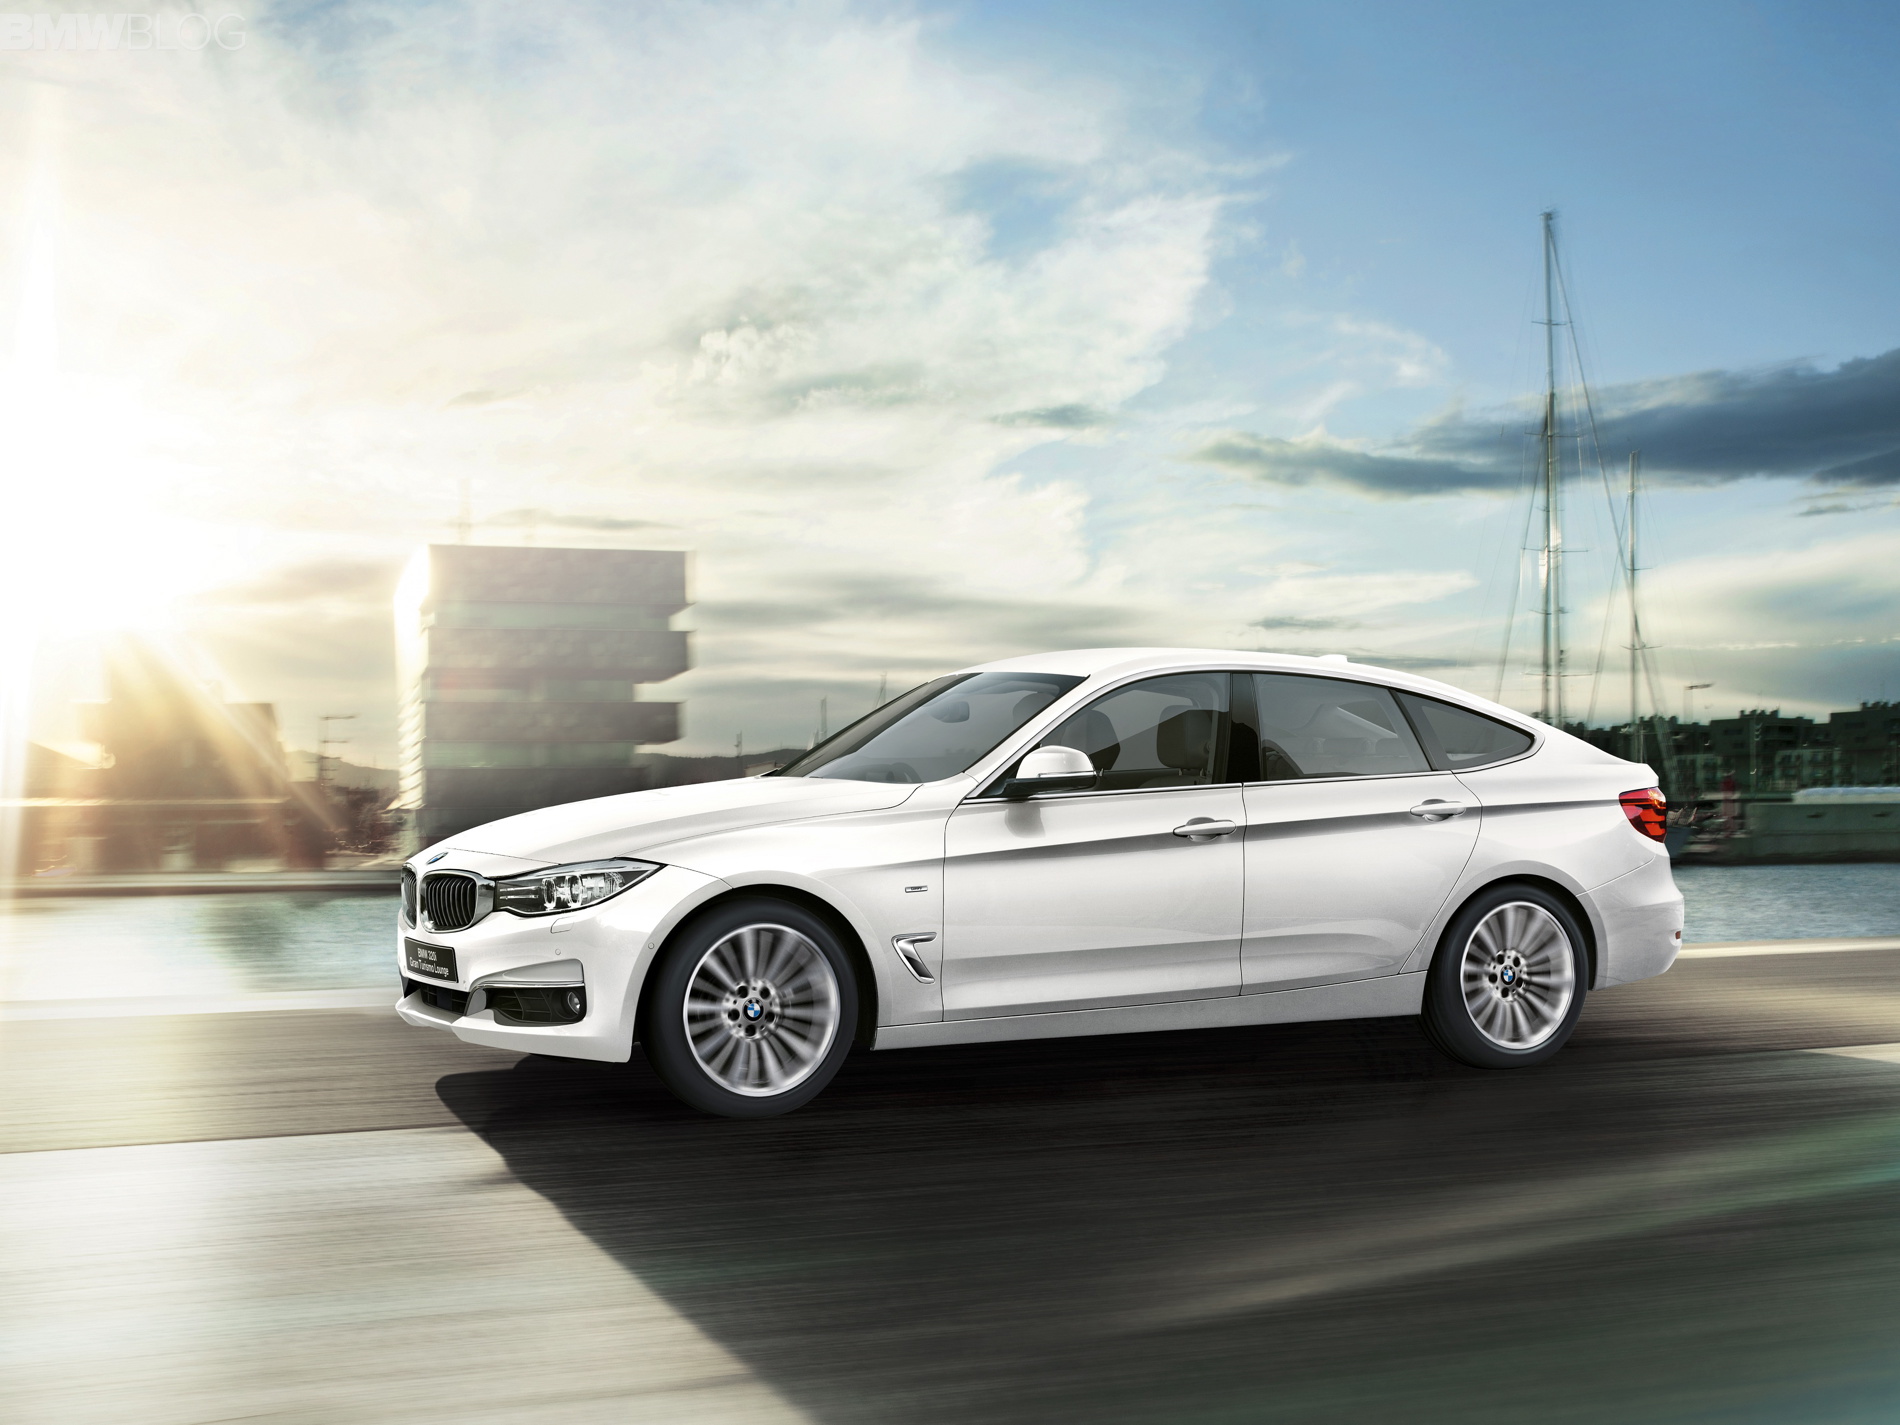 Amazing BMW 3 Series Gran Turismo Pictures & Backgrounds